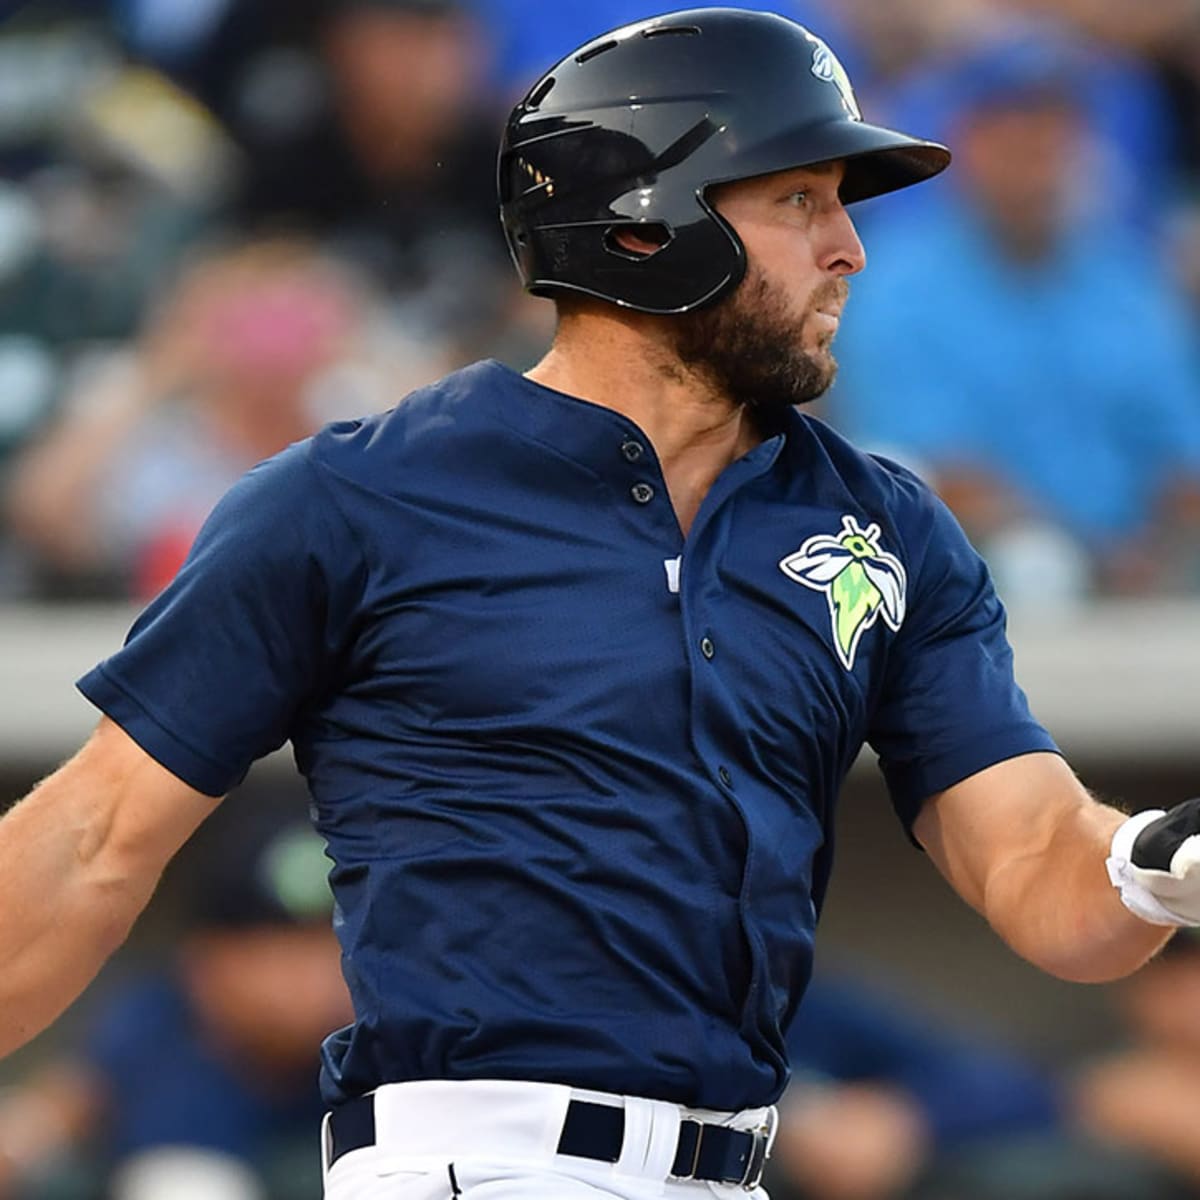 Tim Tebow records best week in the minors - Sports Illustrated